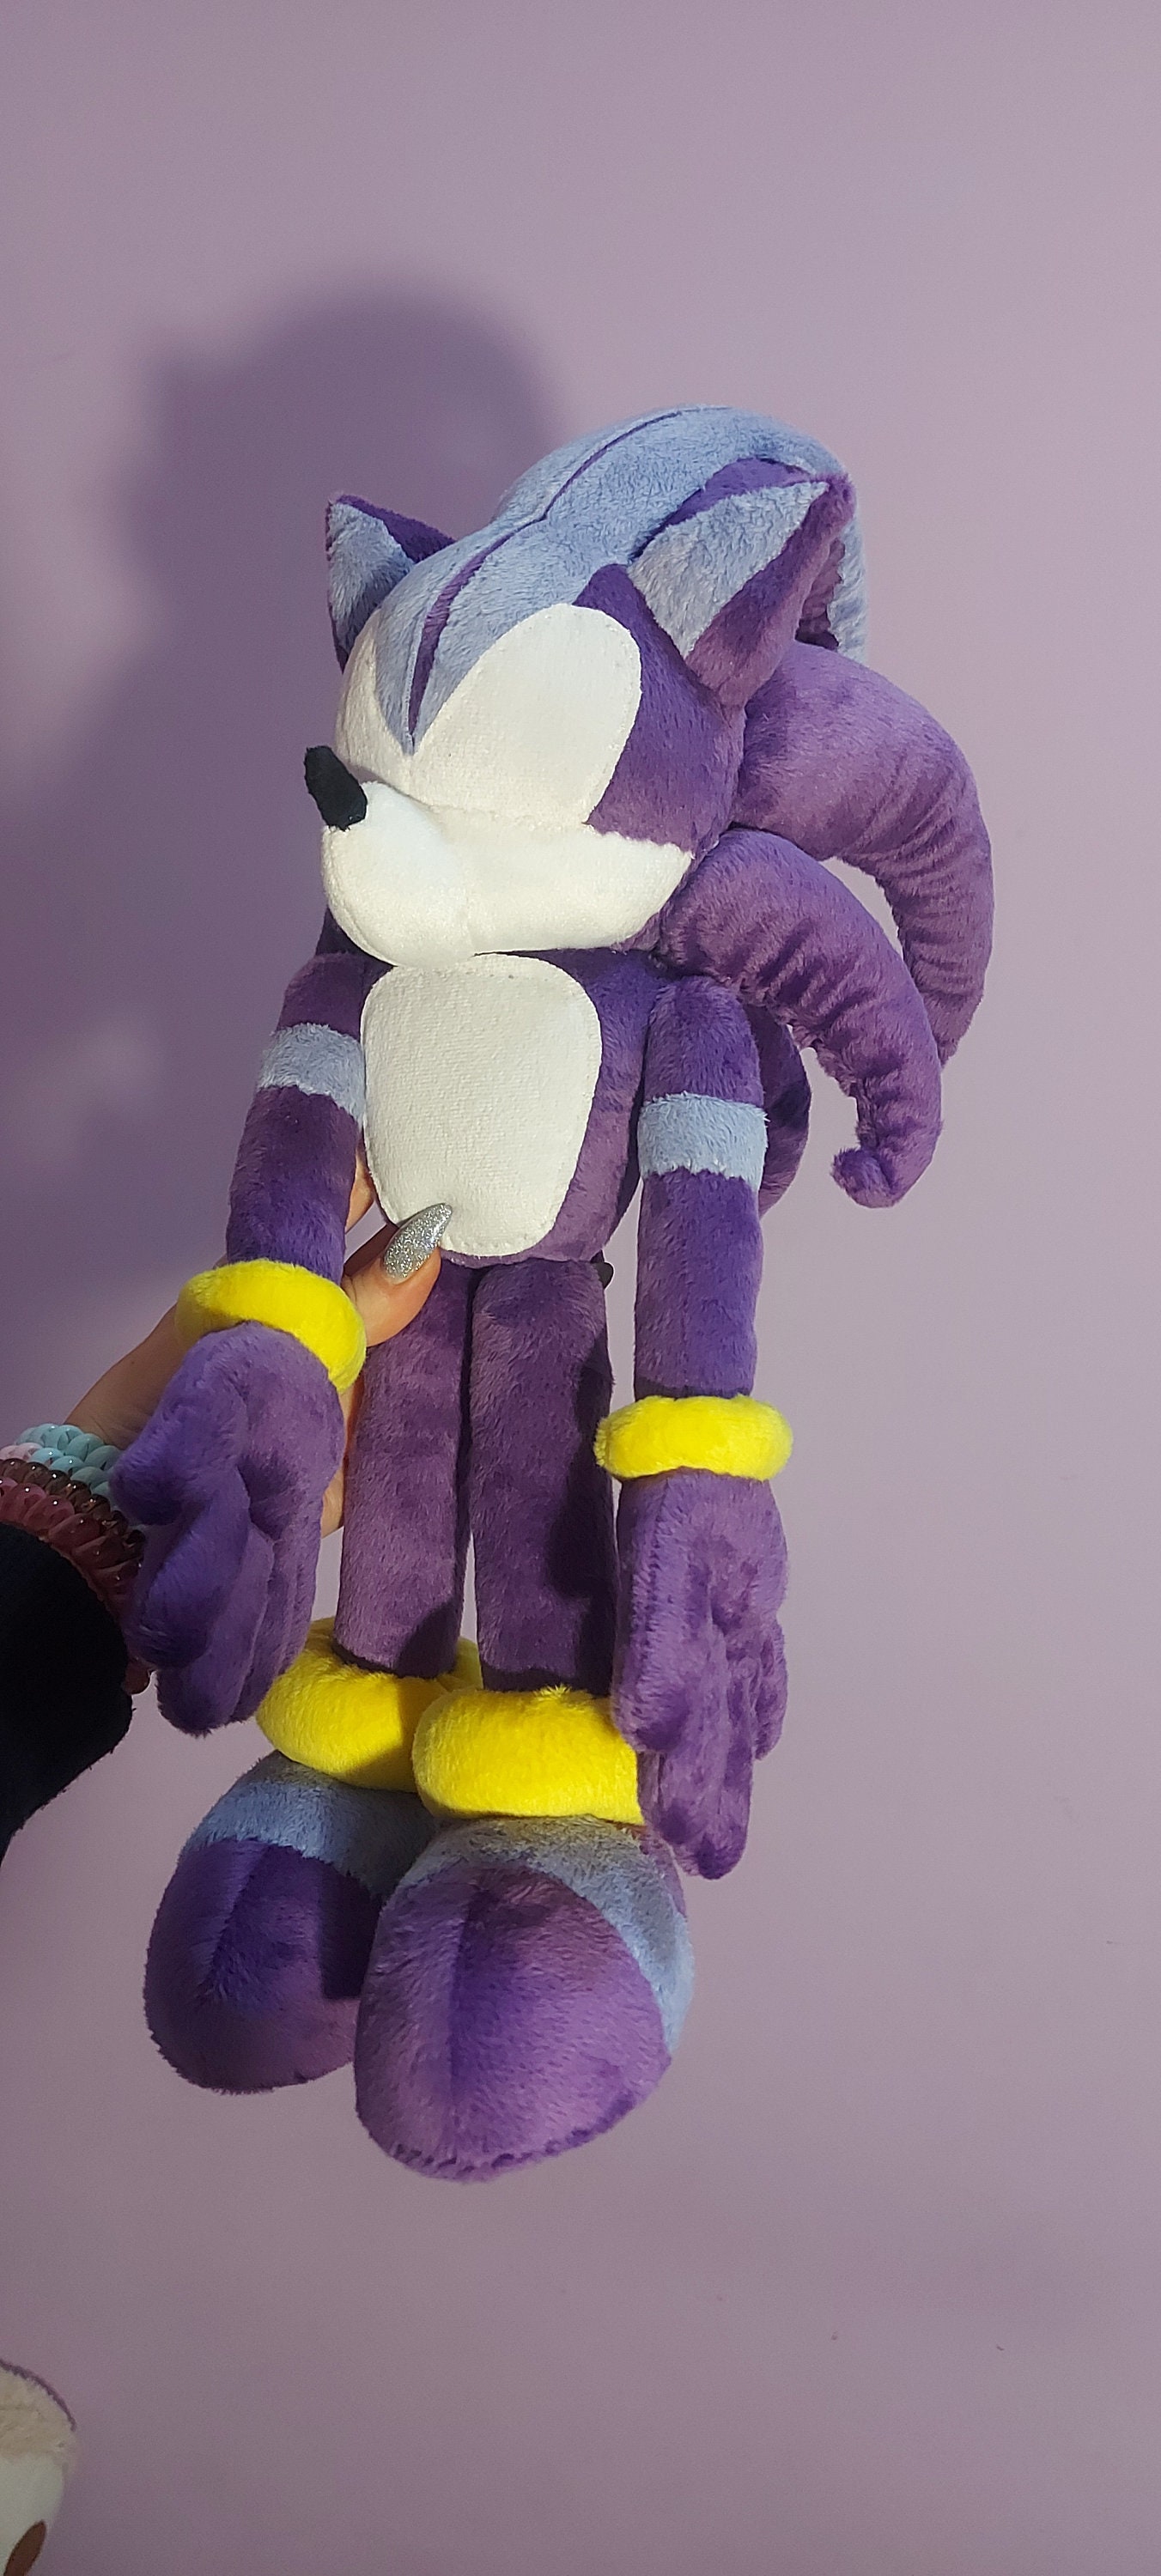 Сustom Plush Just Like Darkspine Sonic and the Secret Rings. Handmade to  Order According to the Pattern Not Official 30-35 Cm. -  Finland